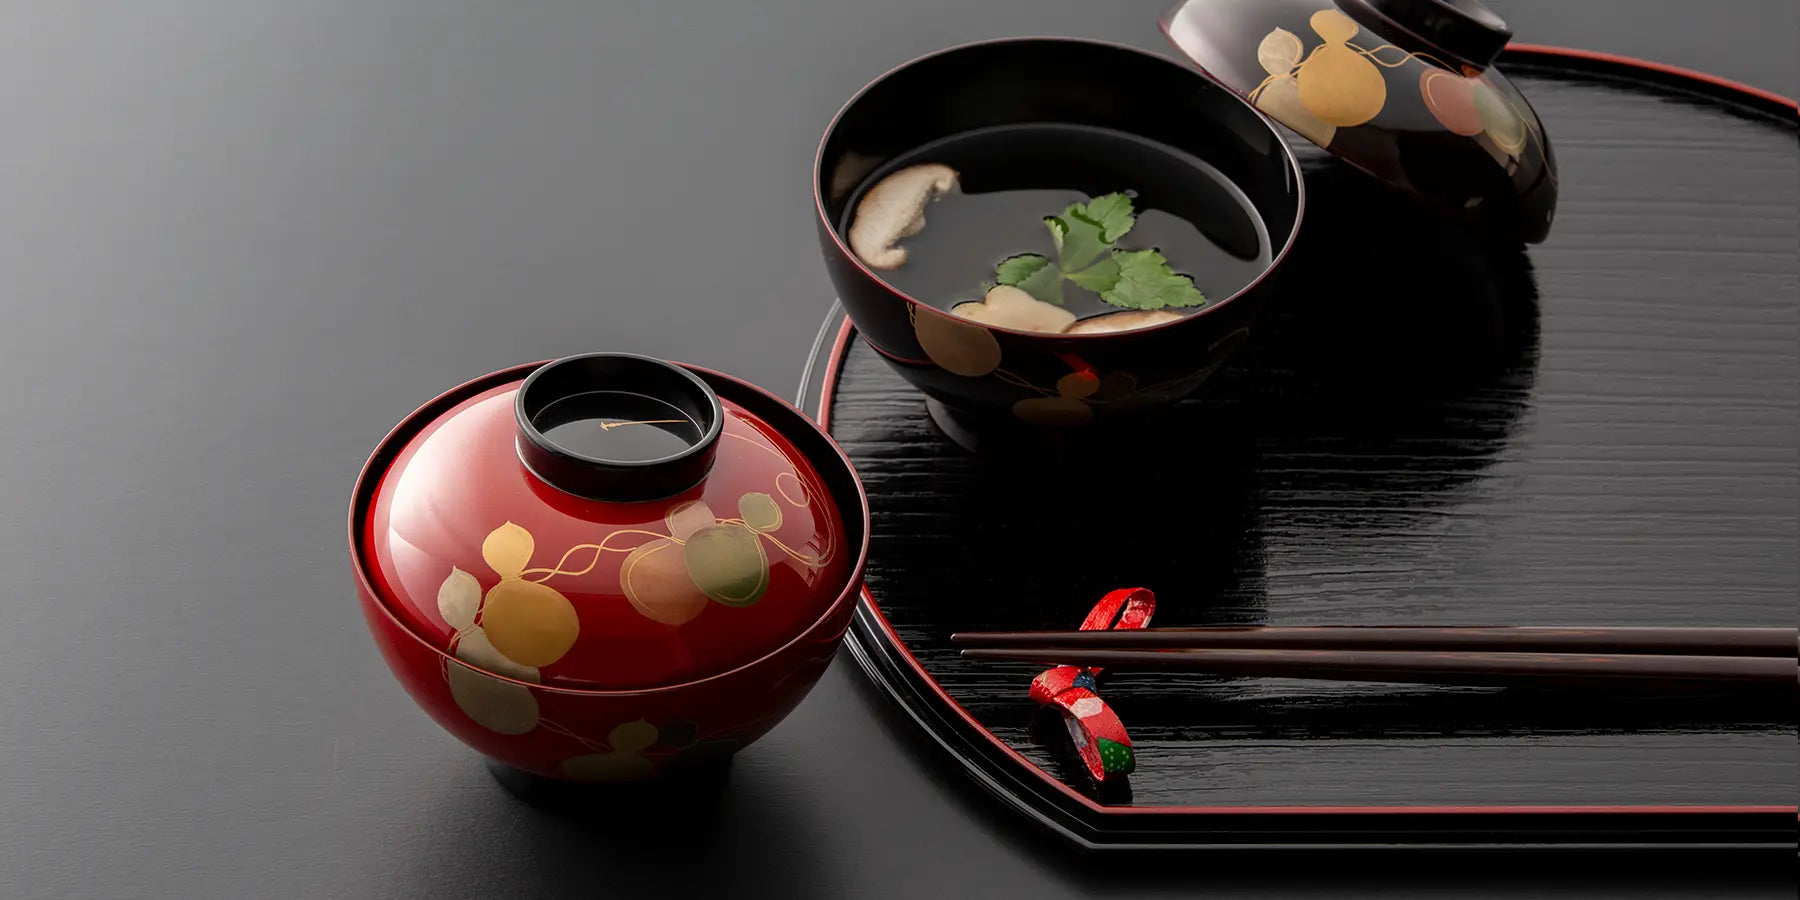 Discover our great selection of Bowls at Globalkitchen Japan.